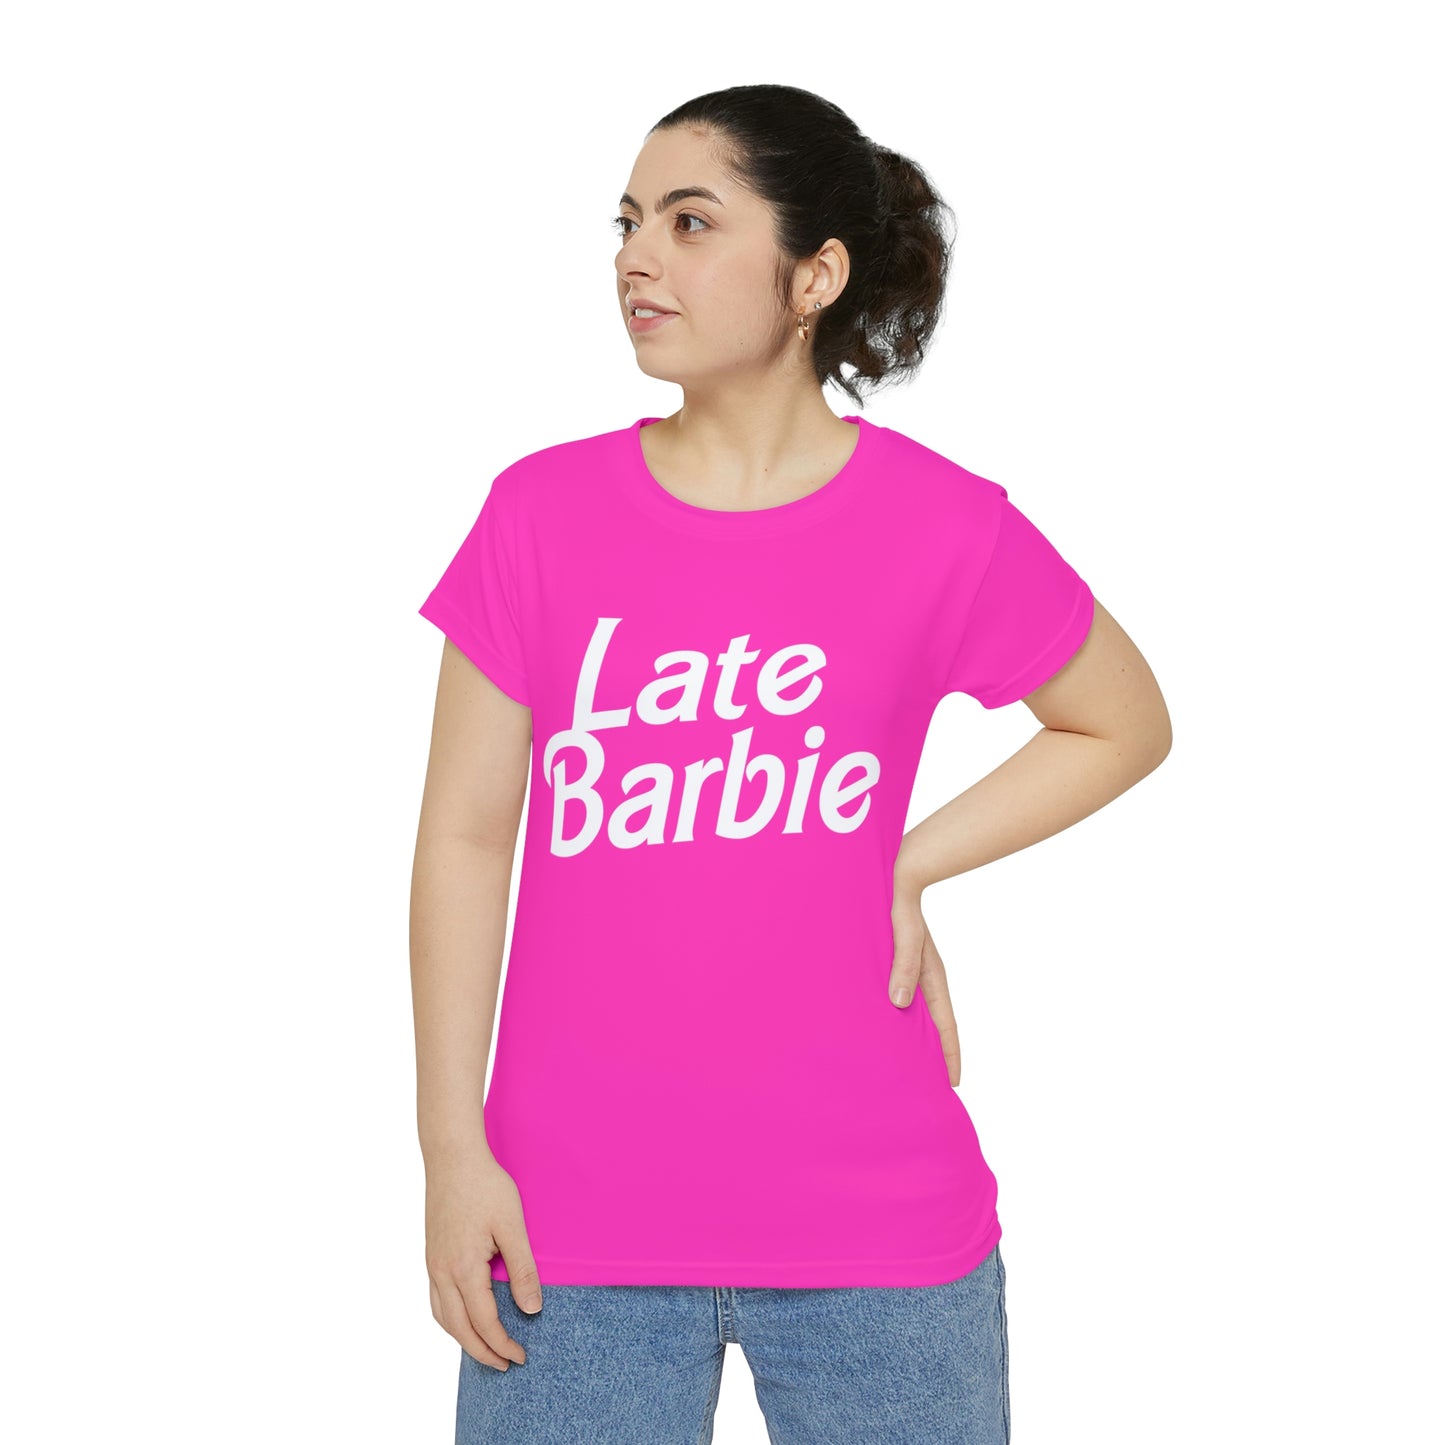 Late Barbie, Bachelorette Party Shirts, Bridesmaid Gifts, Here comes the Party Tees, Group Party Favor Shirts, Bridal Party Shirt for women